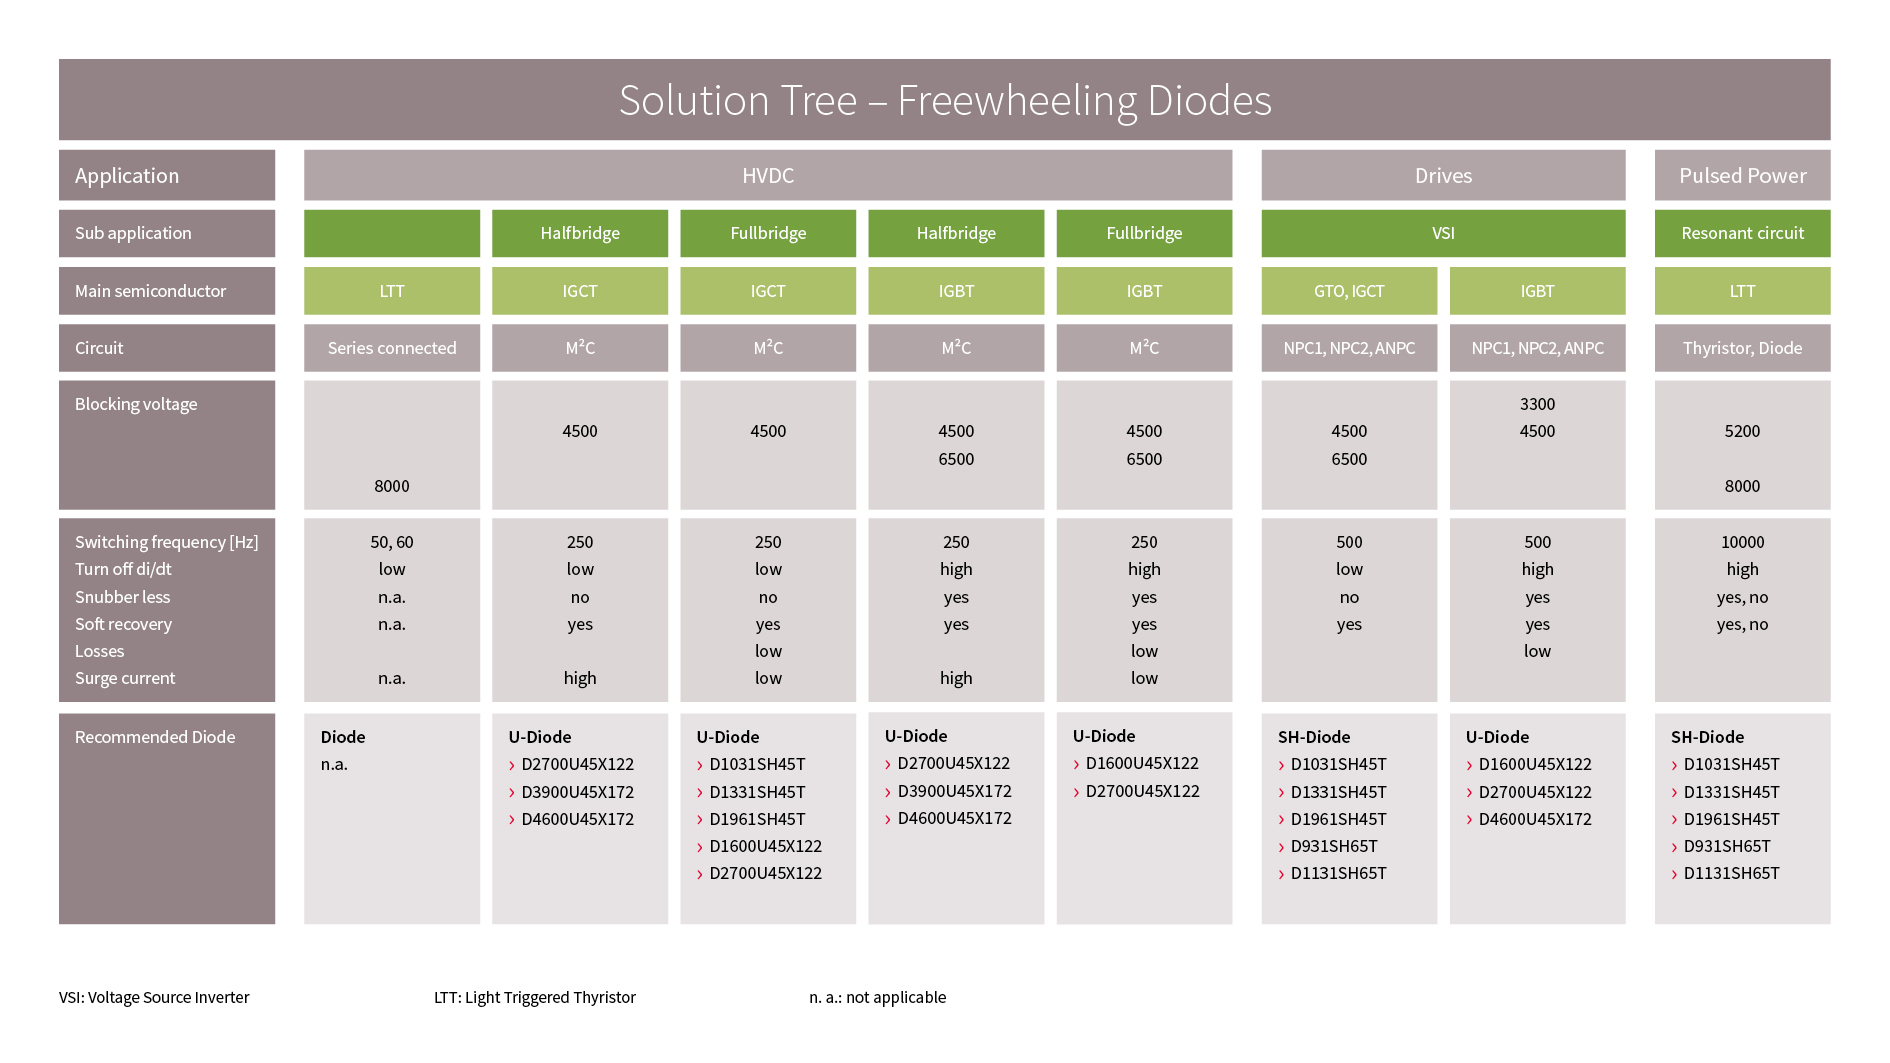 Solution Tree for Freewheeling Diodes